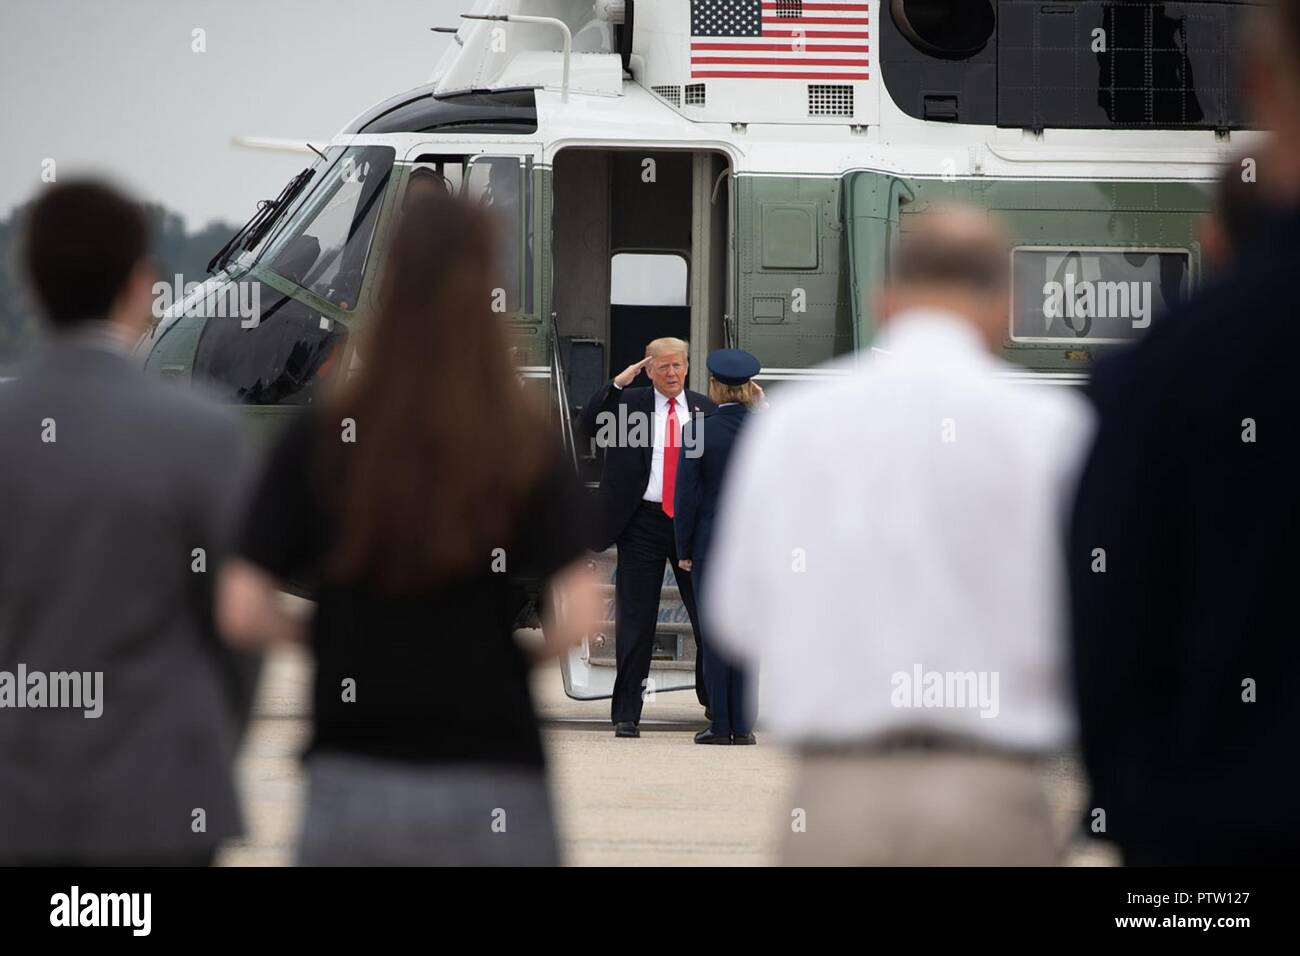 U.S President Donald Trump salutes as he disembarks Marine One on his way to address the International Association of Chiefs of Police and Law Enforcement Convention and campaign for GOP candidates in Florida October 8, 2018 at Joint Base Andrews, Maryland. Stock Photo